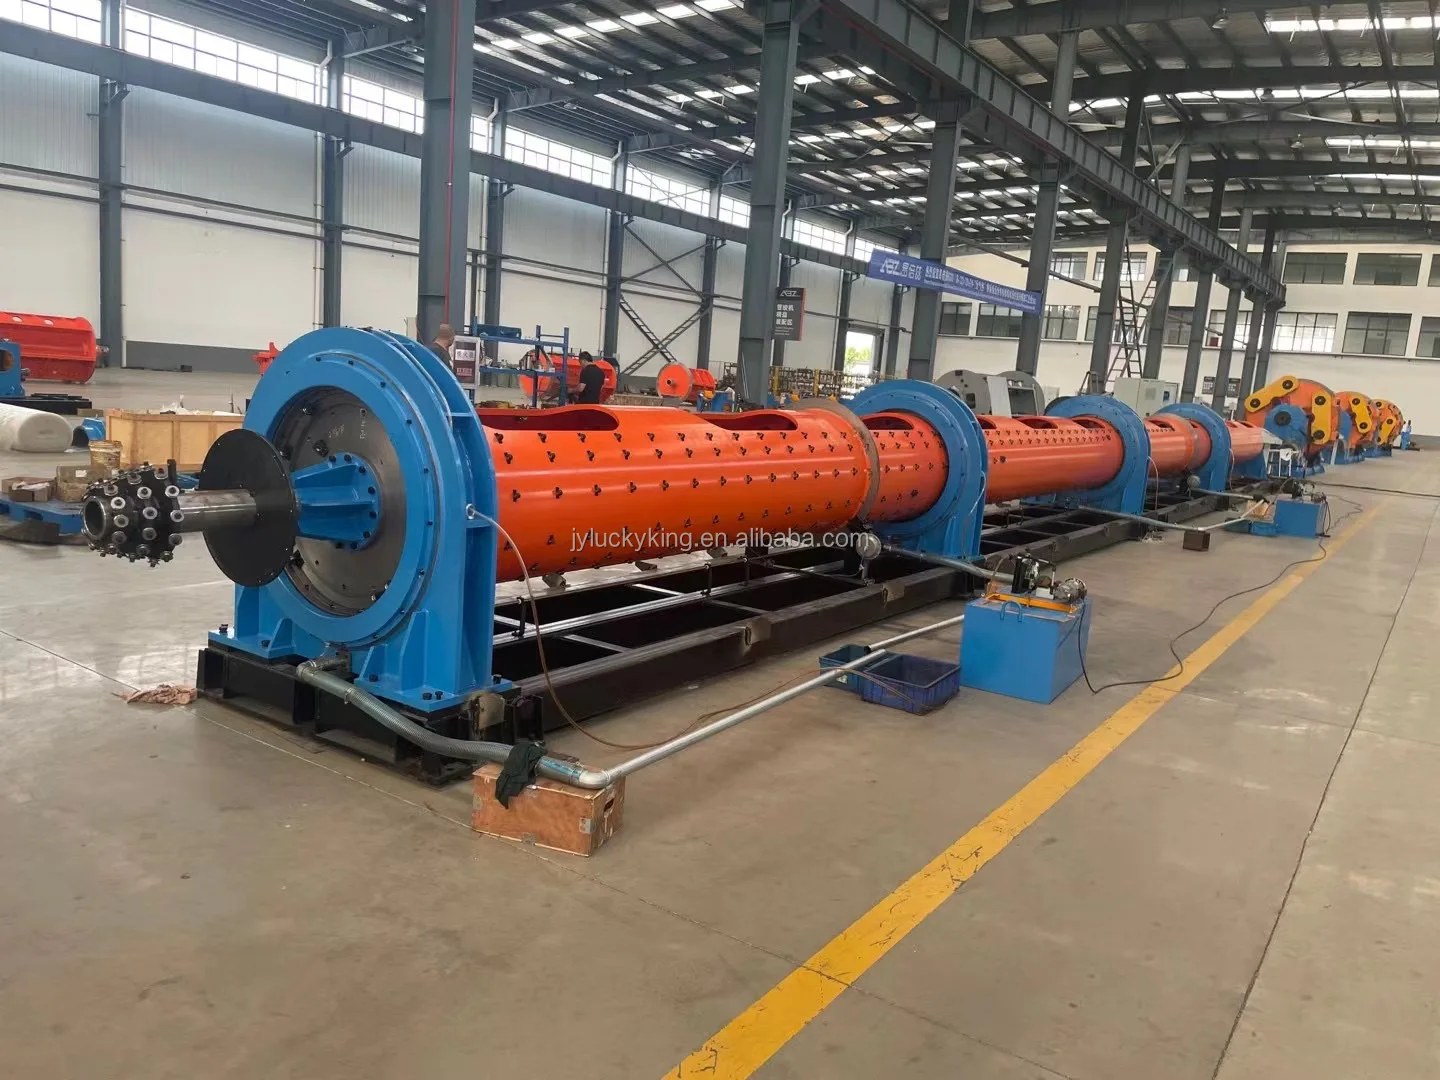 Giant 630/12 electric wire cable tubular stranding machine for stranding copper wire and aluminum wire